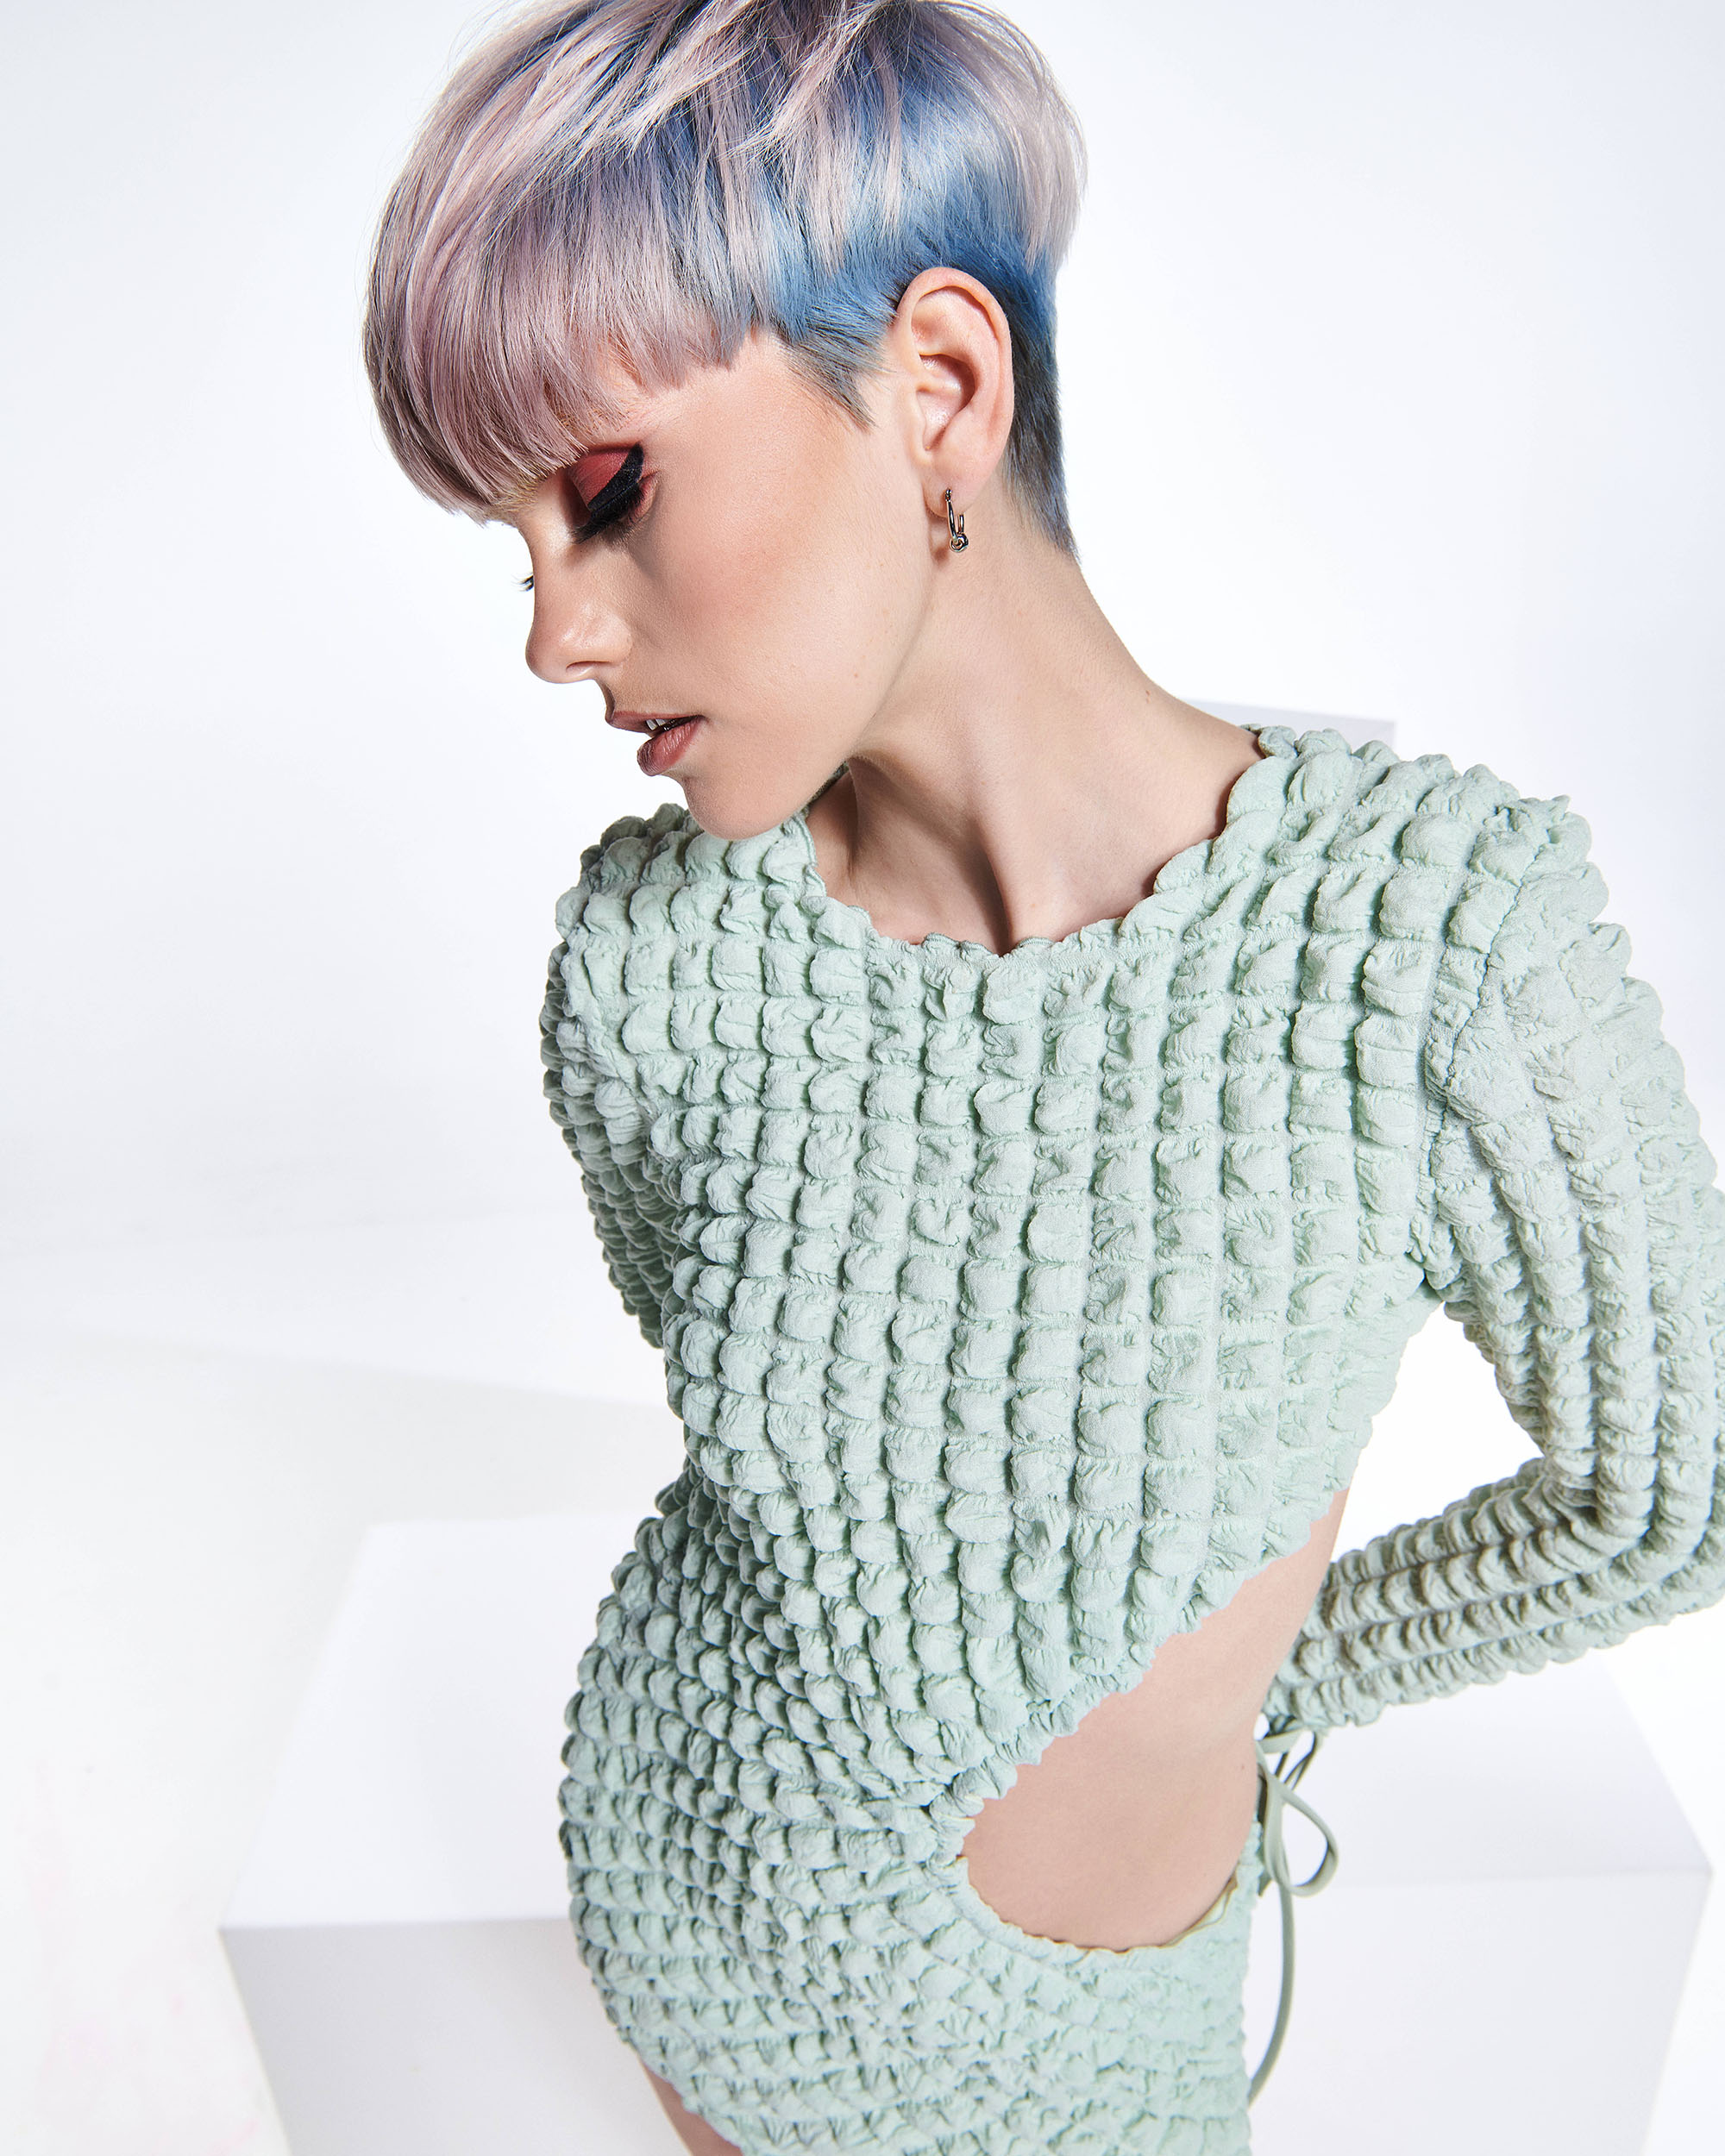 Get Extra Creative With Your Color - Bangstyle